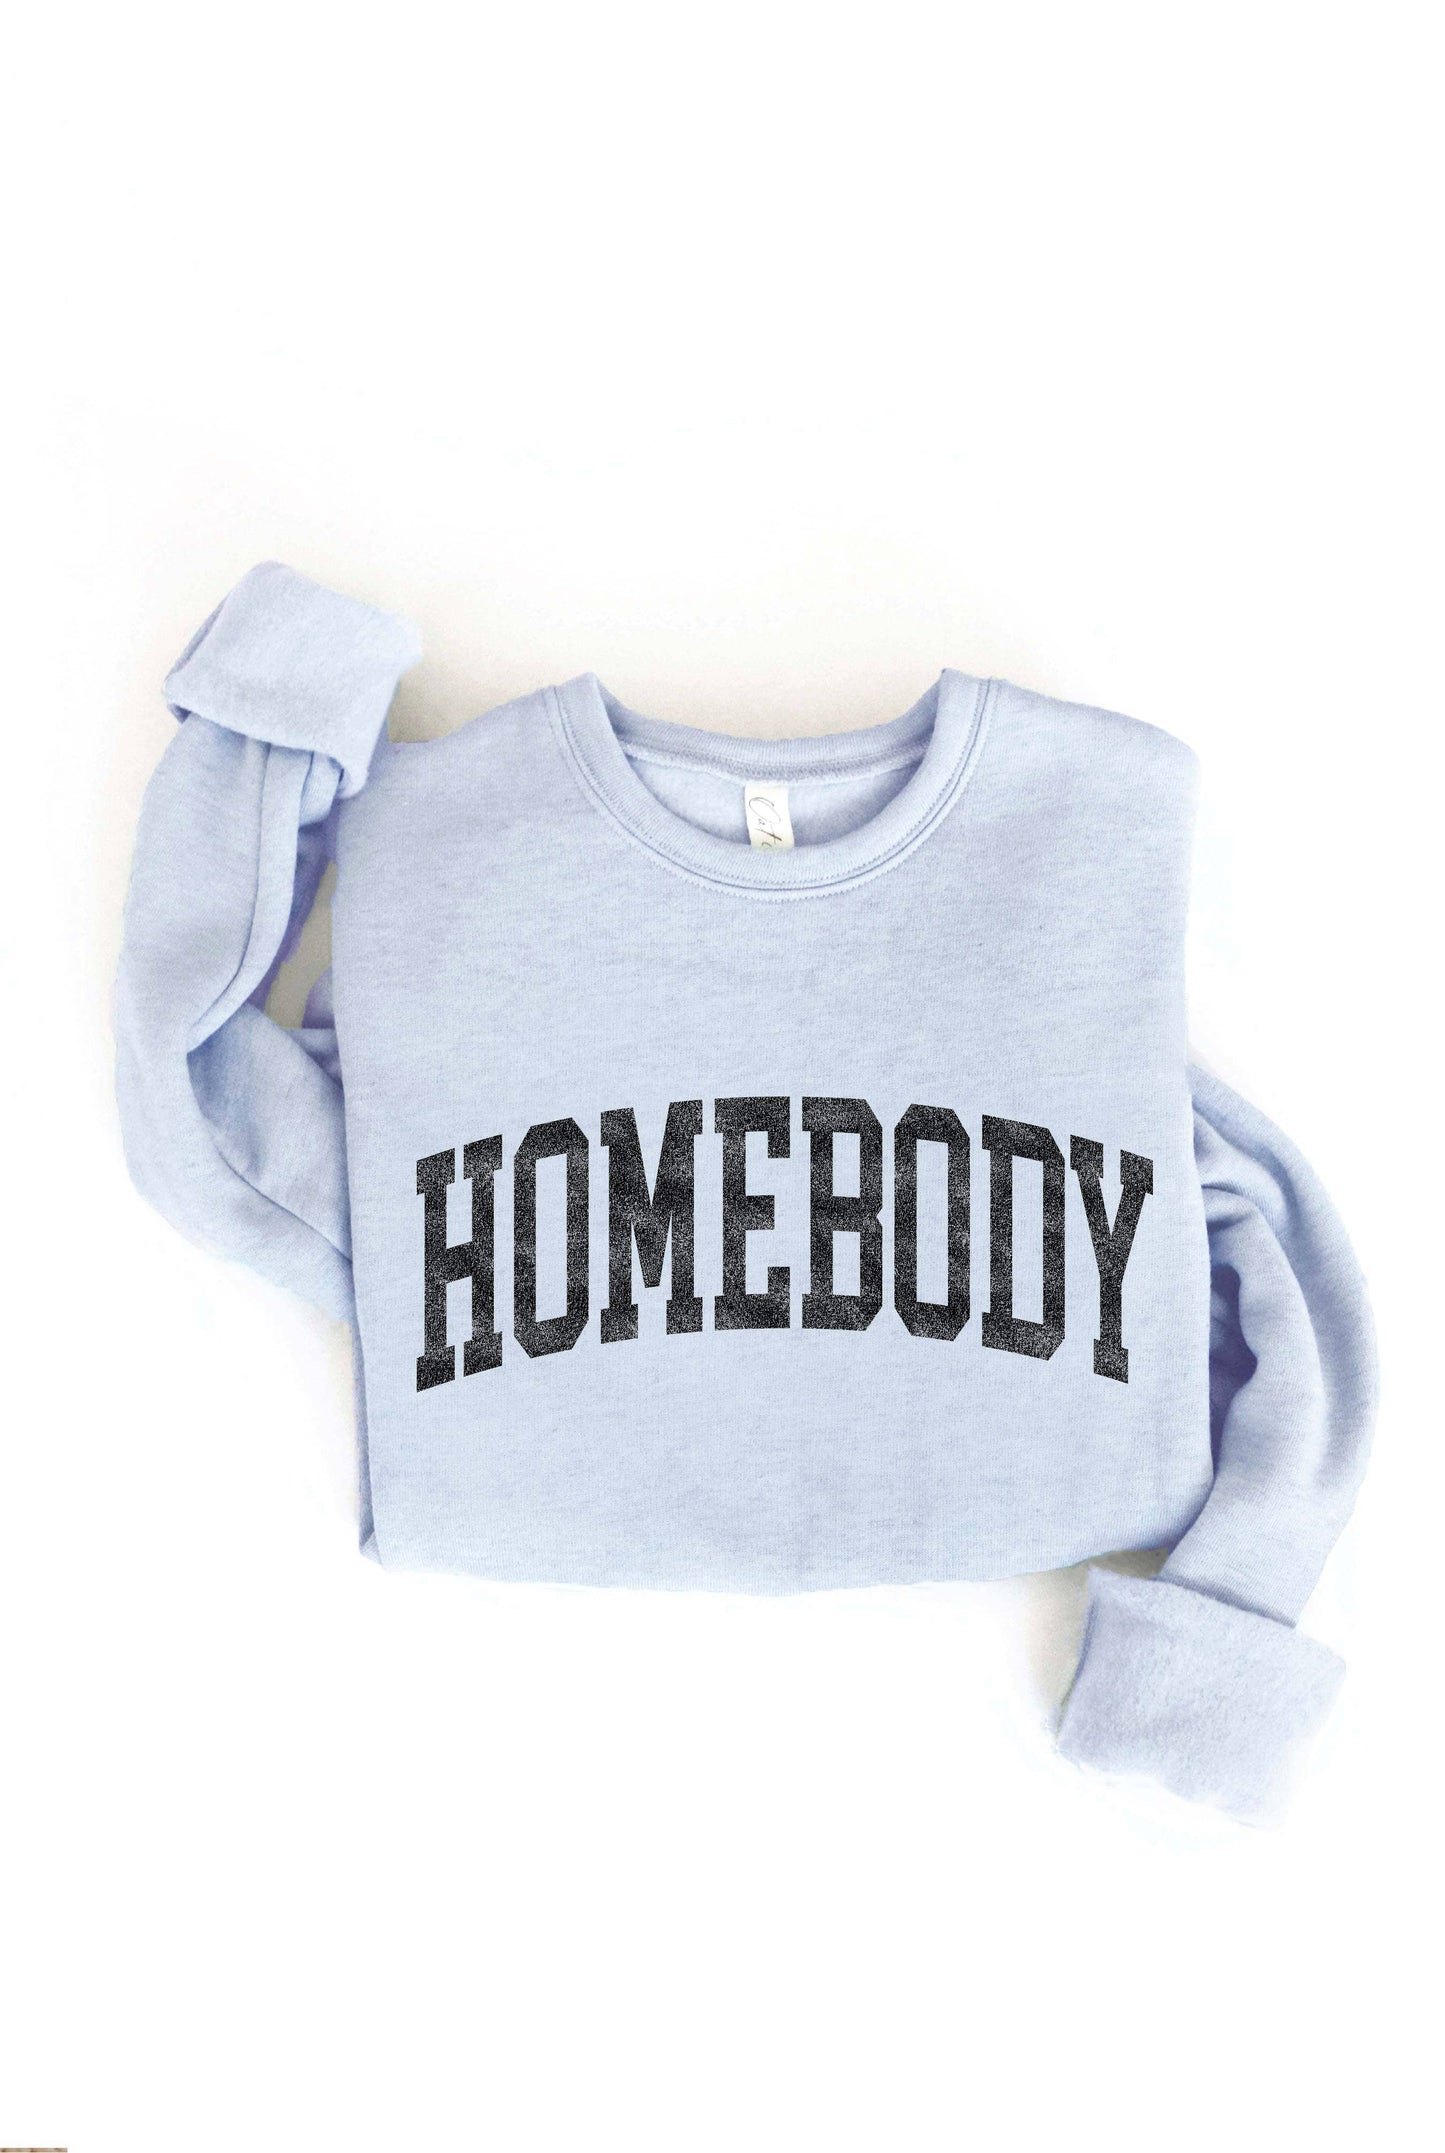 HOMEBODY Graphic Sweatshirt: LIGHT BLUE Spring-Summer OAT COLLECTIVE